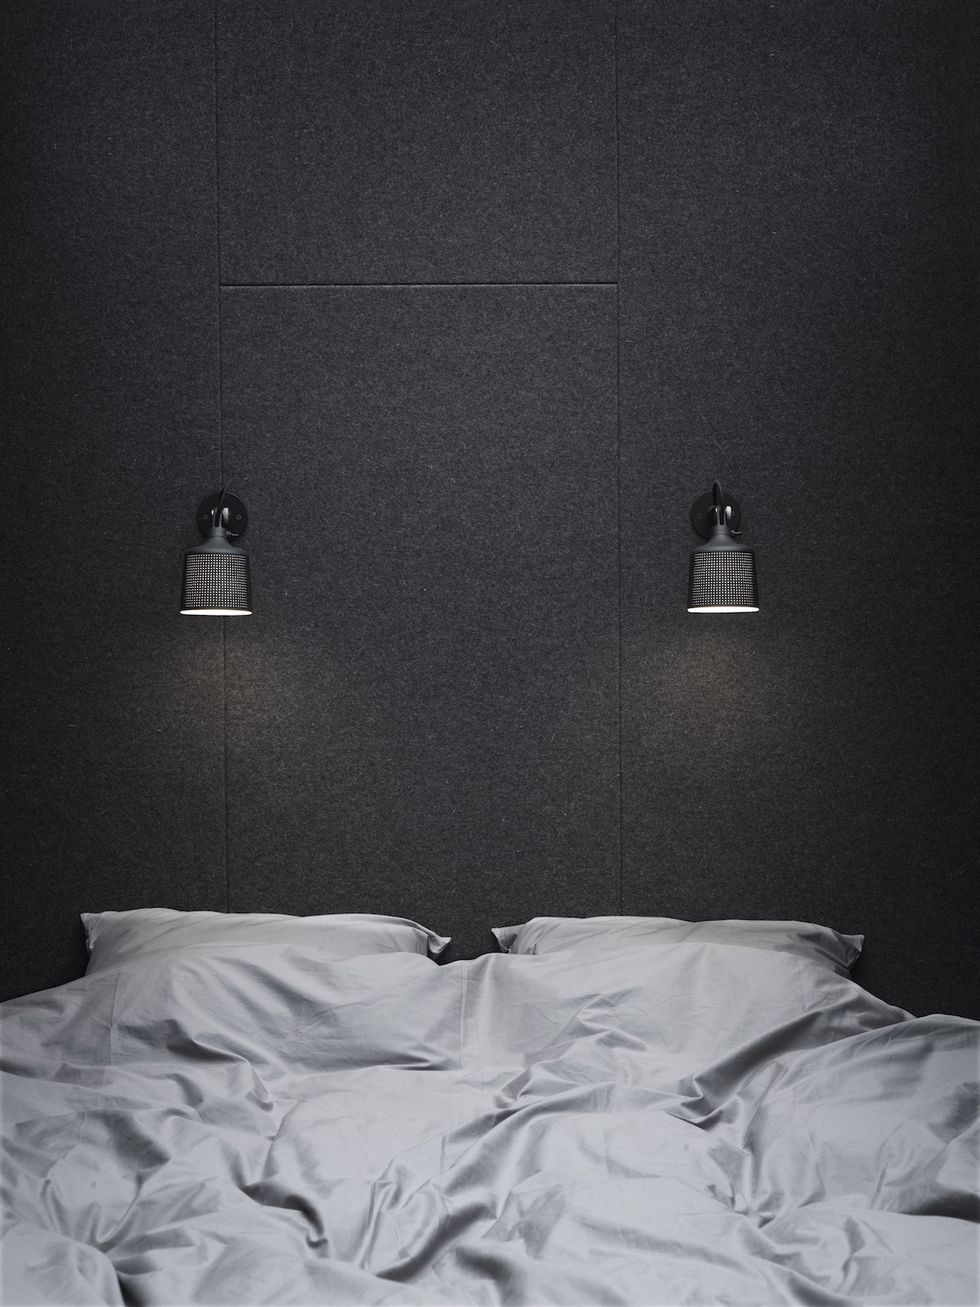 White, Black, Bedroom, Bed sheet, Room, Bed, Wall, Furniture, Black-and-white, Bedding, 